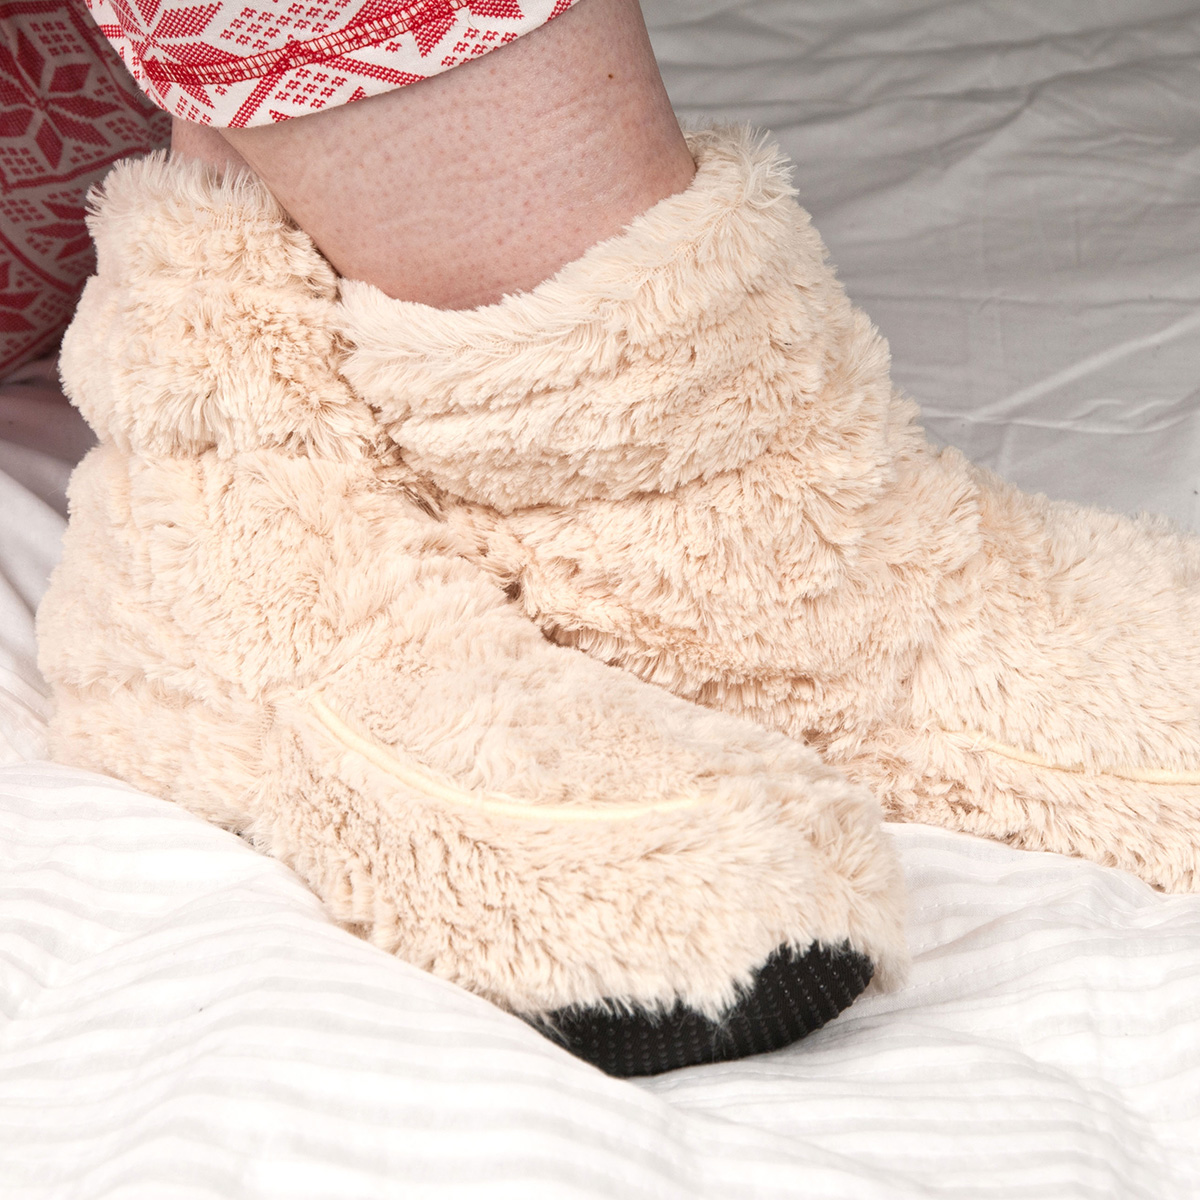 Microwavable Cream Cozy Boots - For Mummy